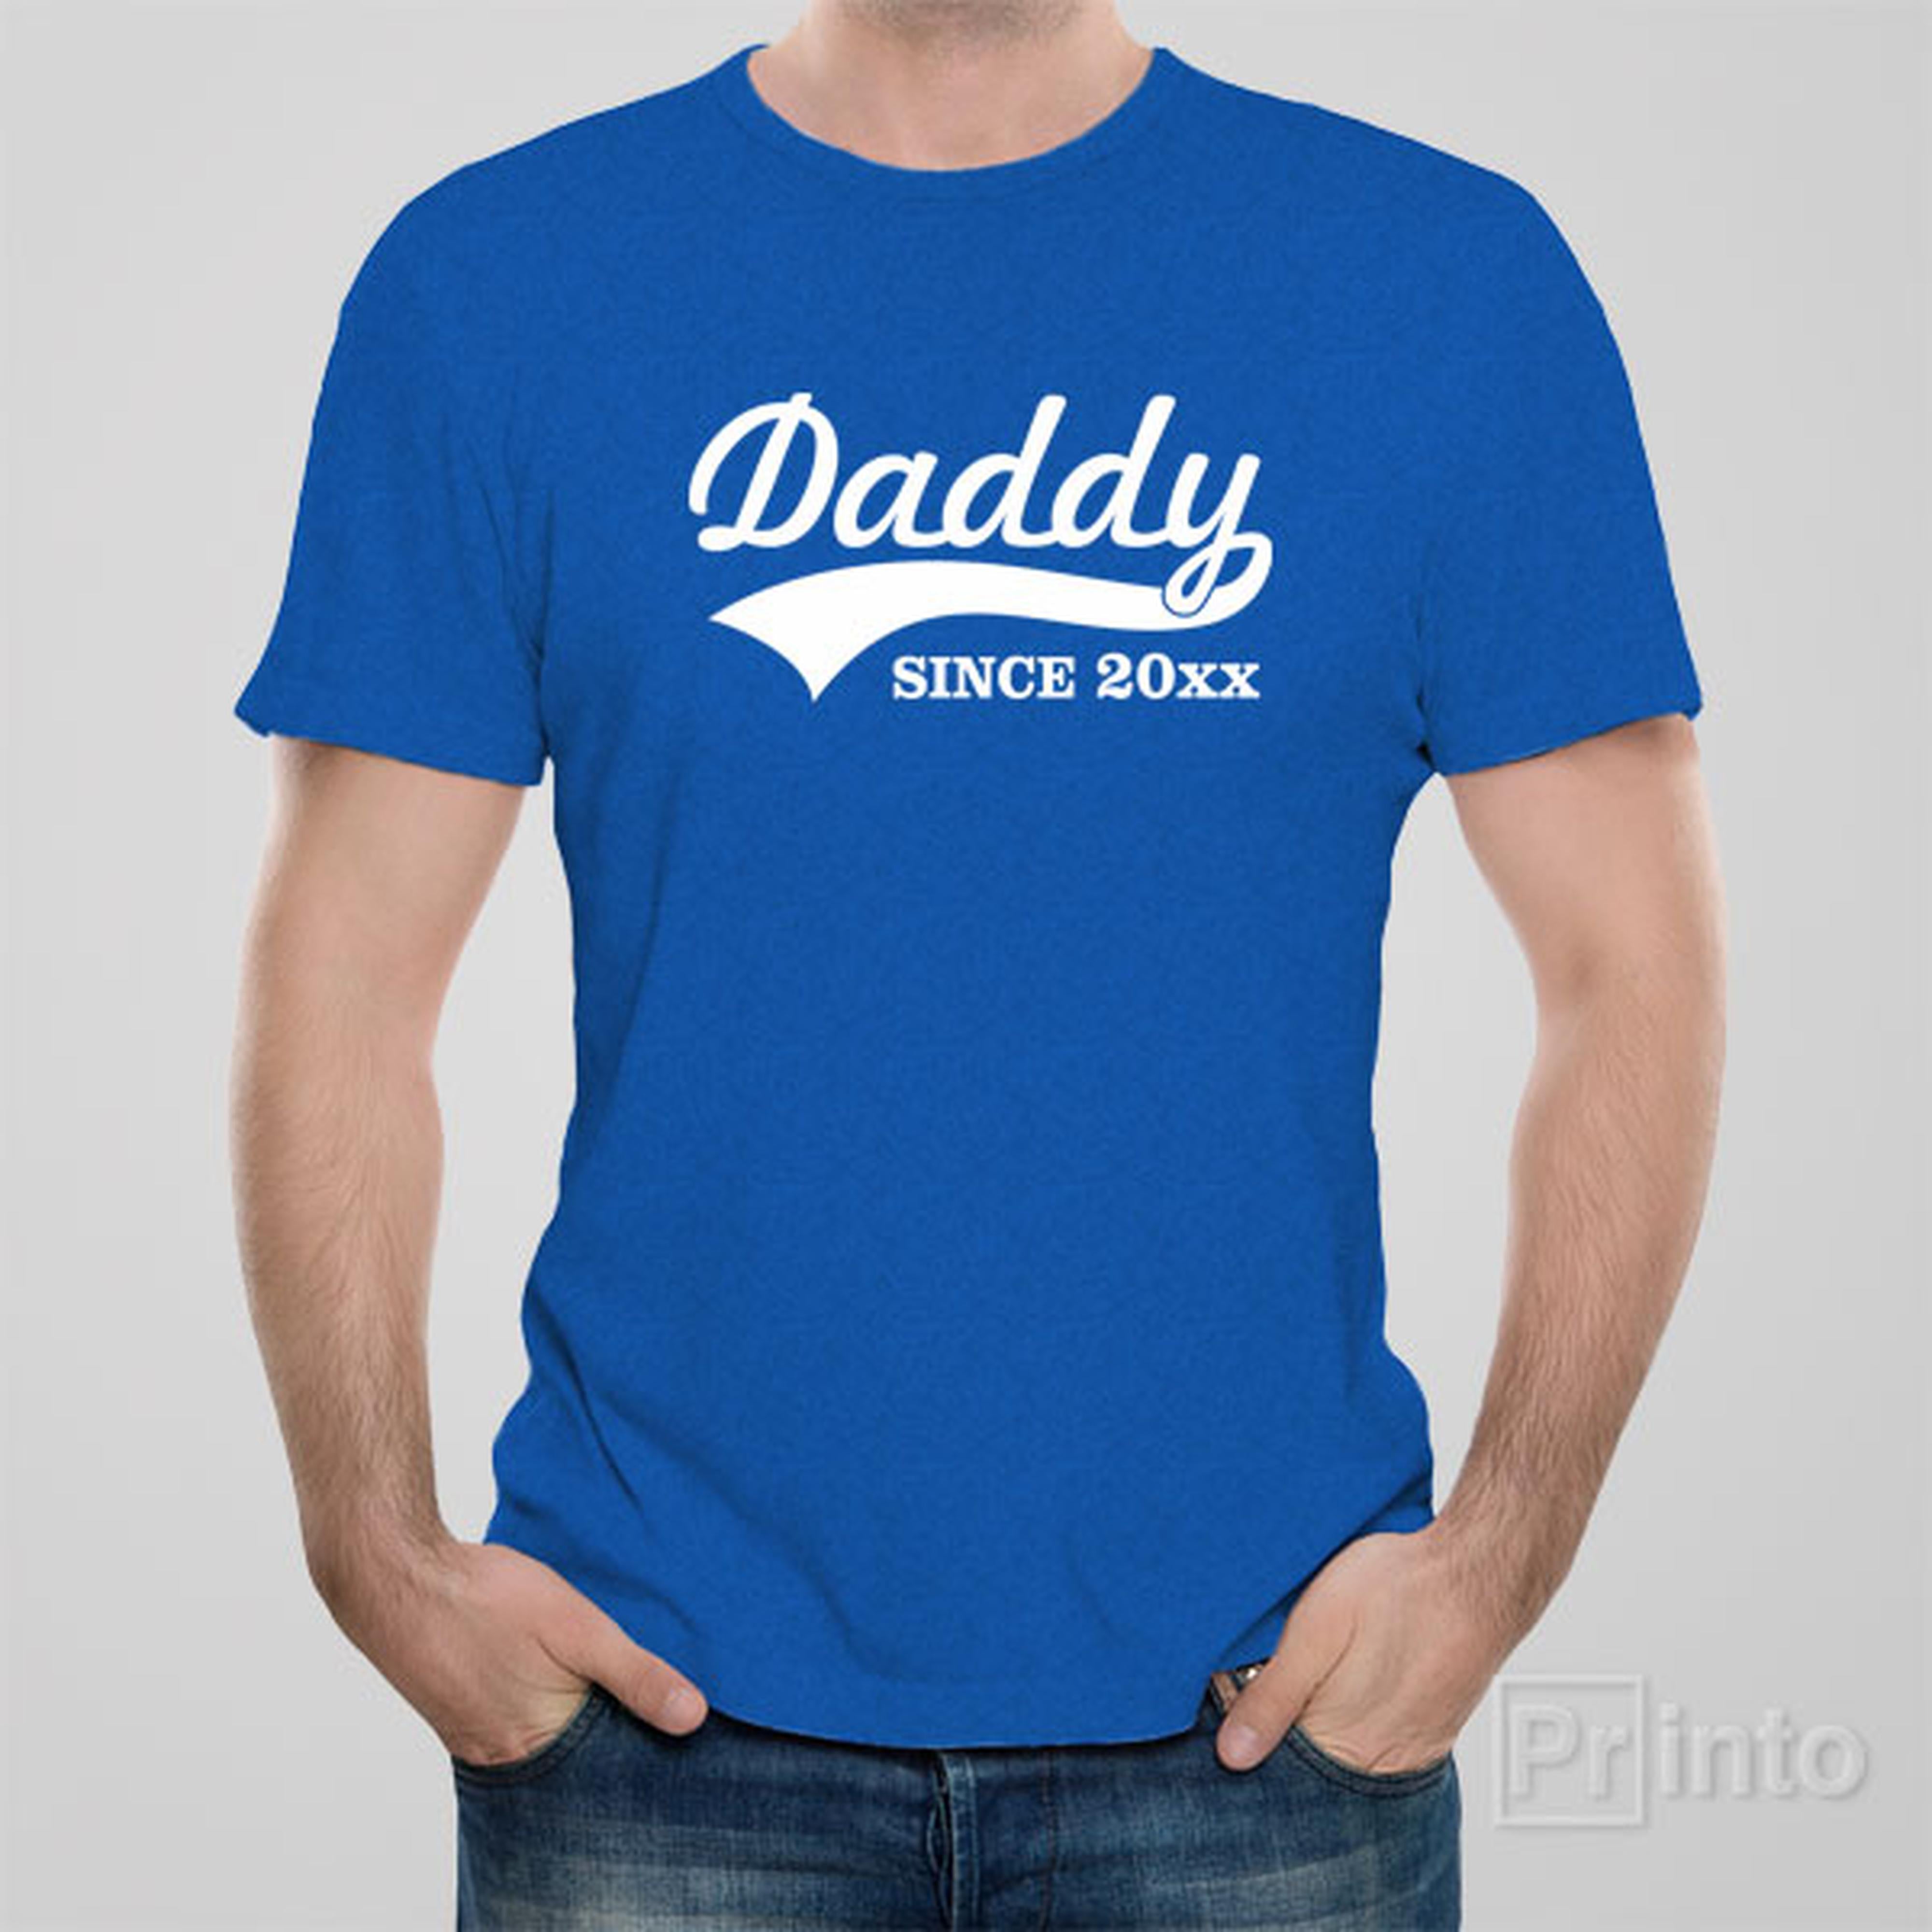 daddy-since-xxxx-personalised-t-shirt